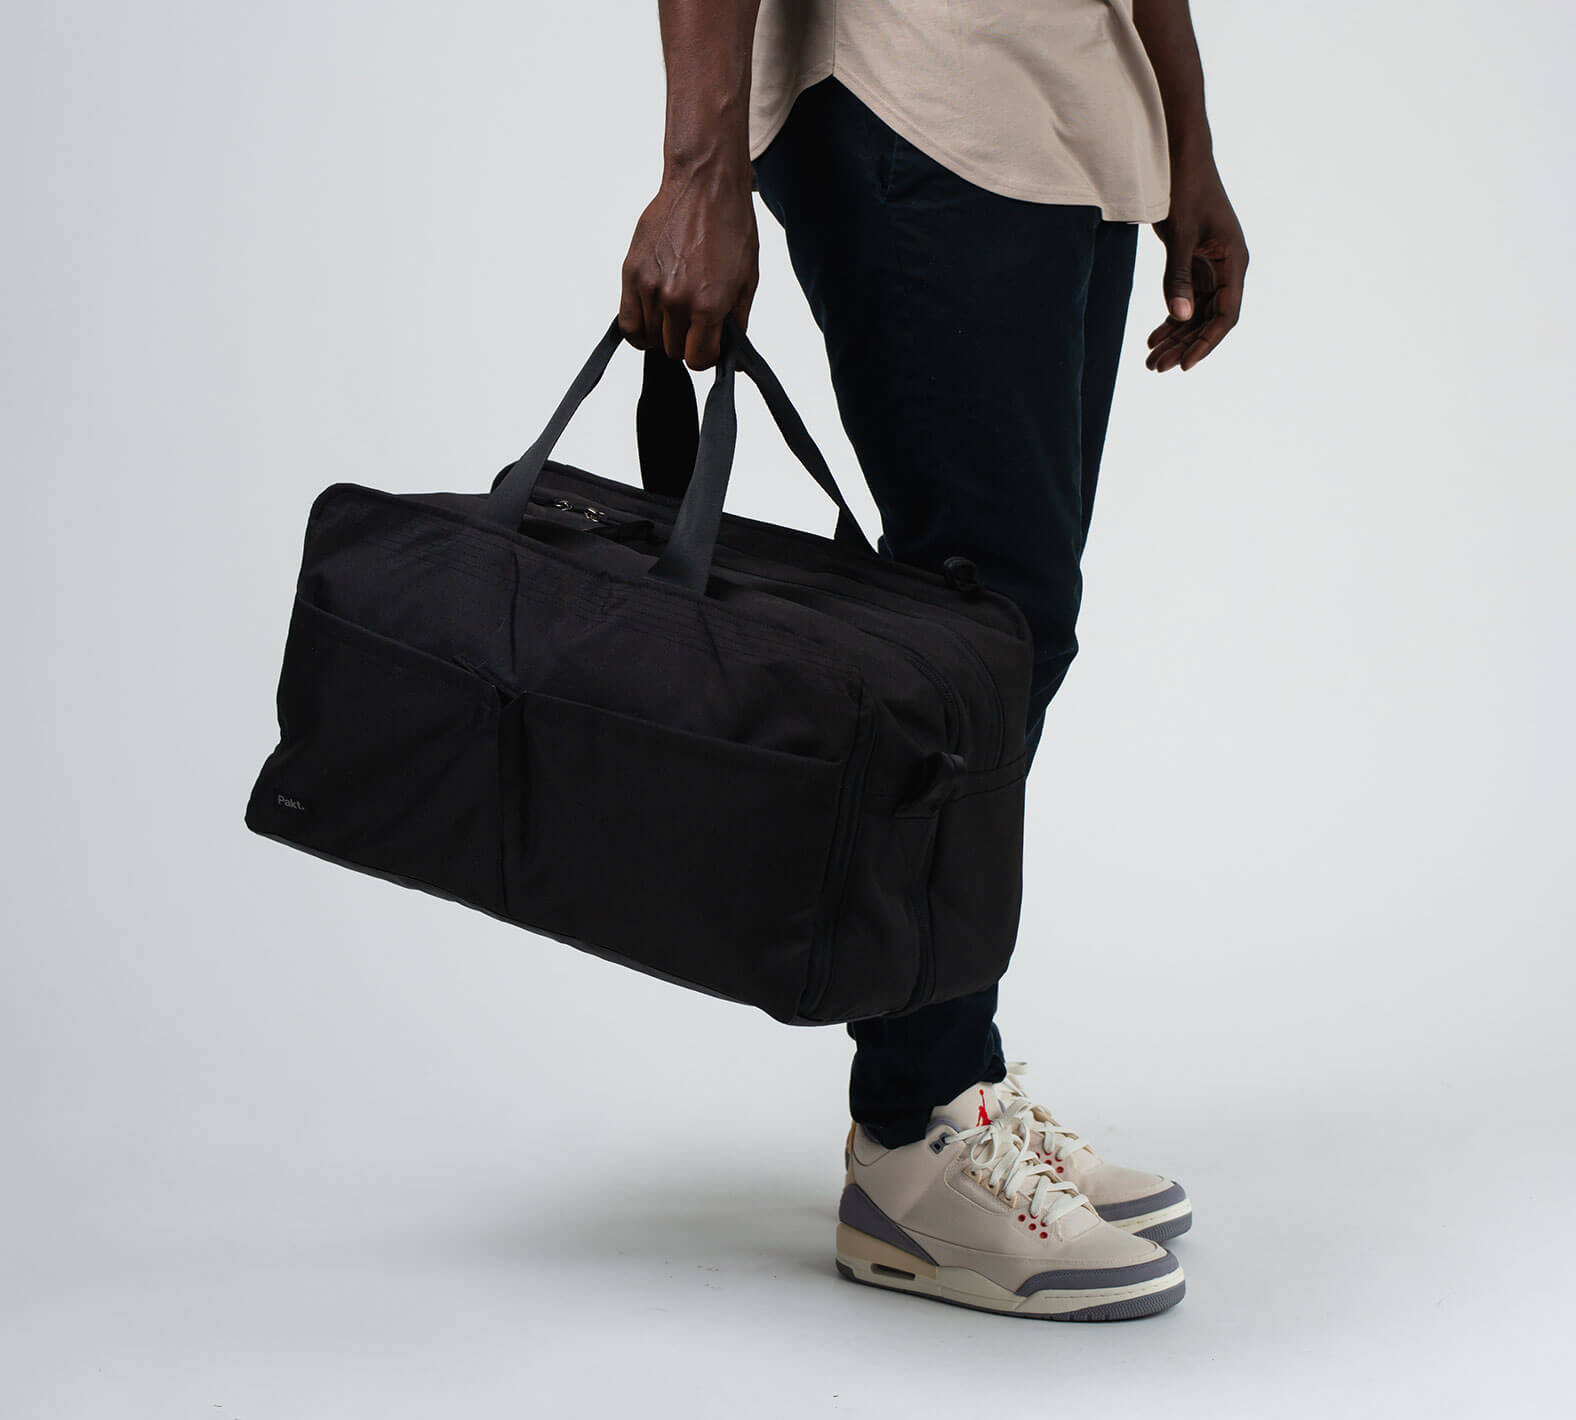 the 50L duffel/backpack in black has extra long handles for carrying by hand or over the shoulder